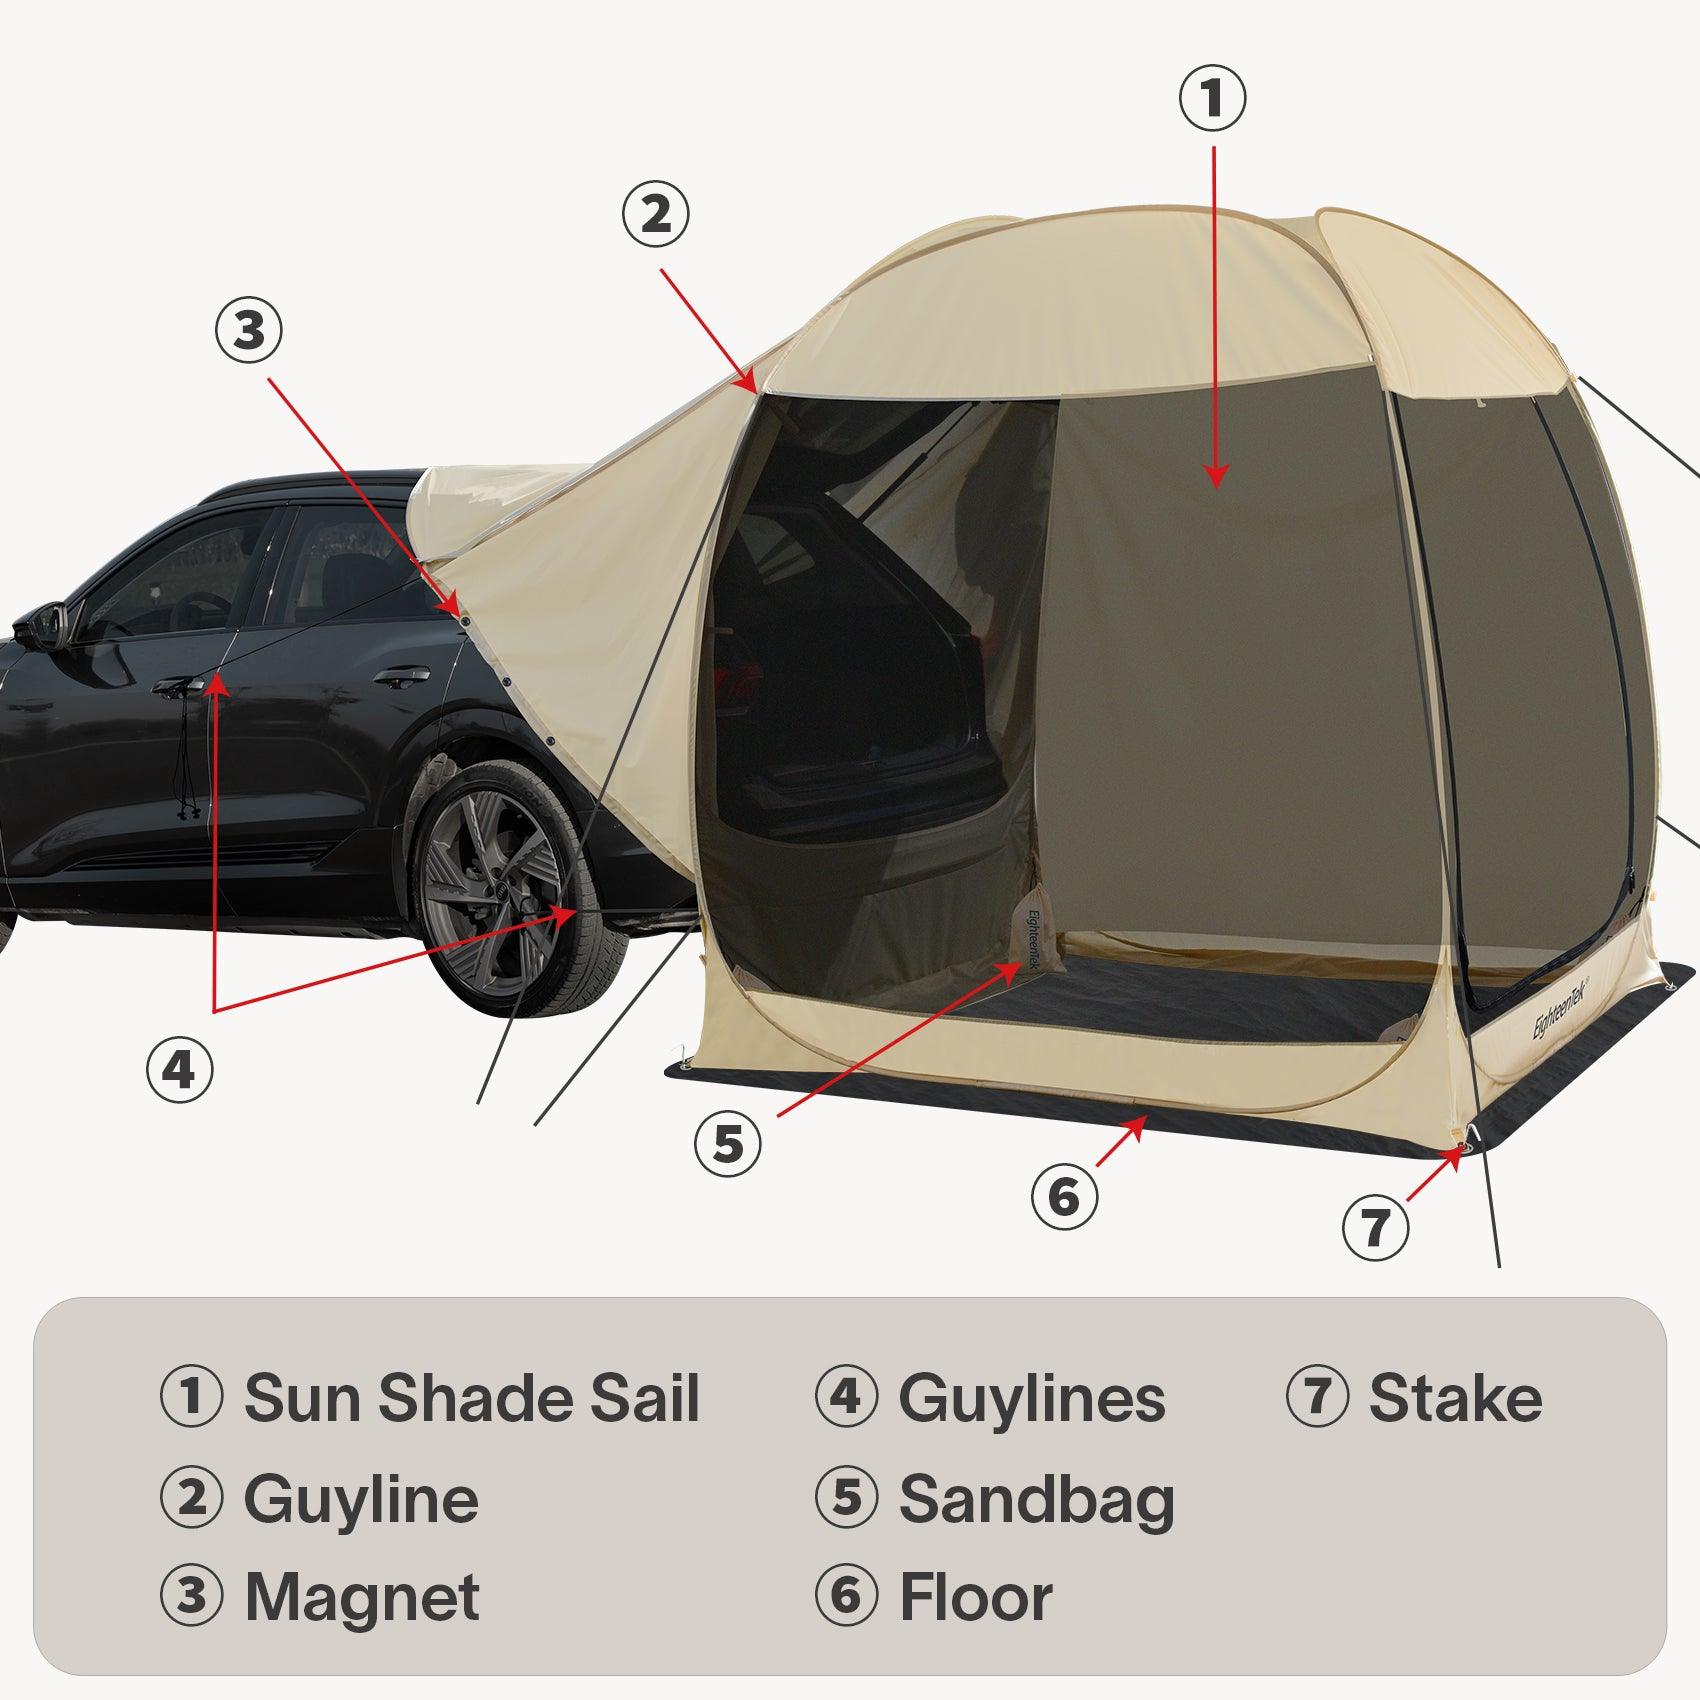 The Specific Position of the Parts in the Tent